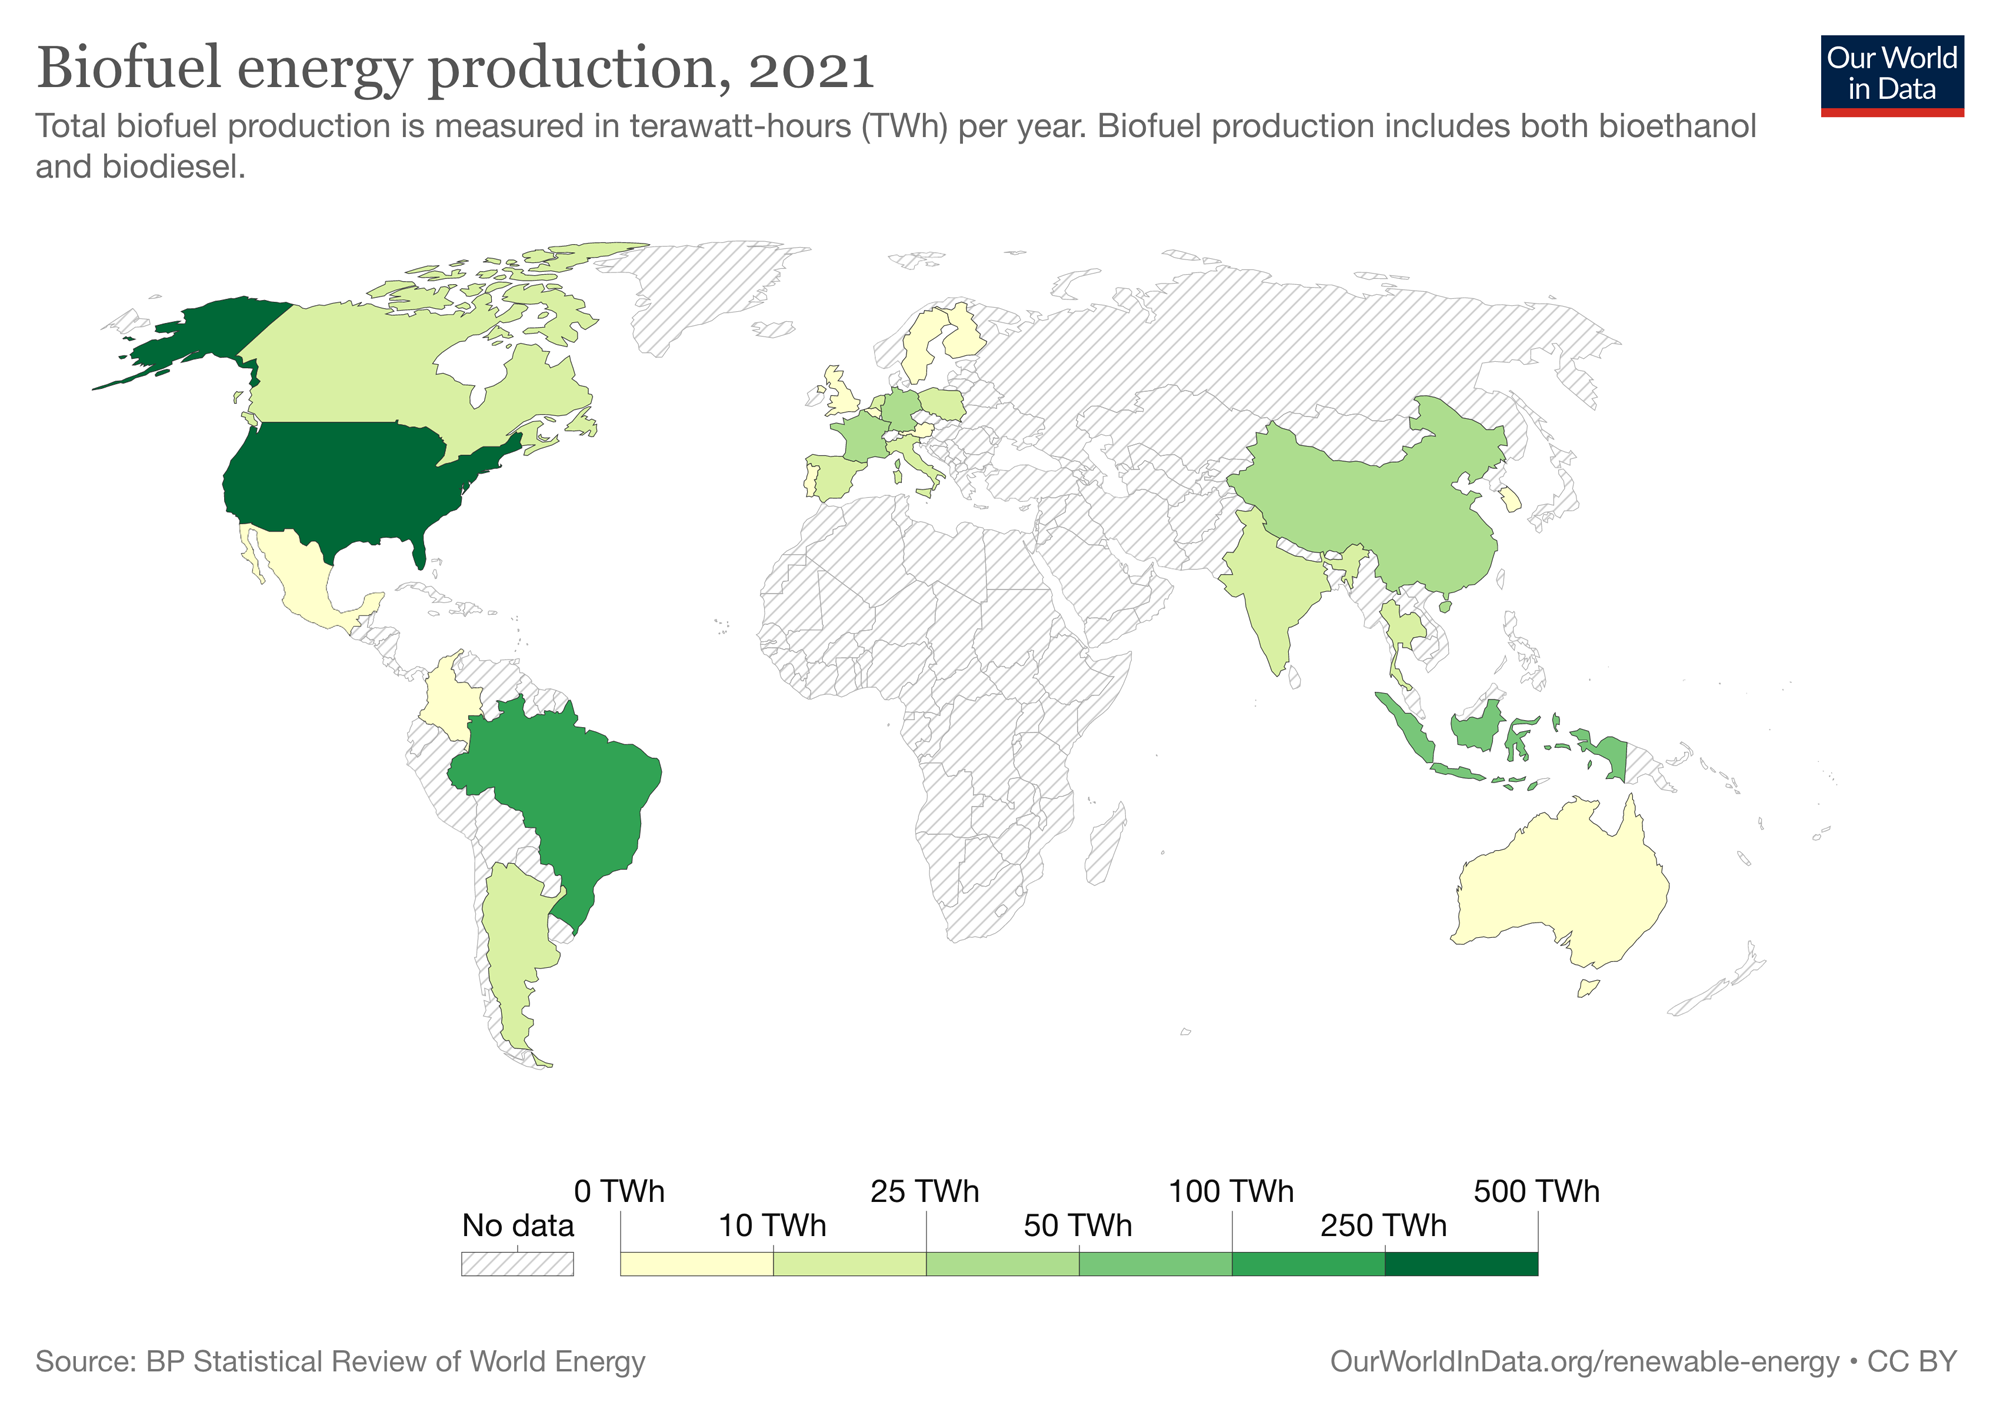 Map showing worldwide production of biofuels in 2021, with countries in darker shades of green producing more and countries in light shades of green producing less (many countries have no data). The United States is the top producer, followed by Brazil.